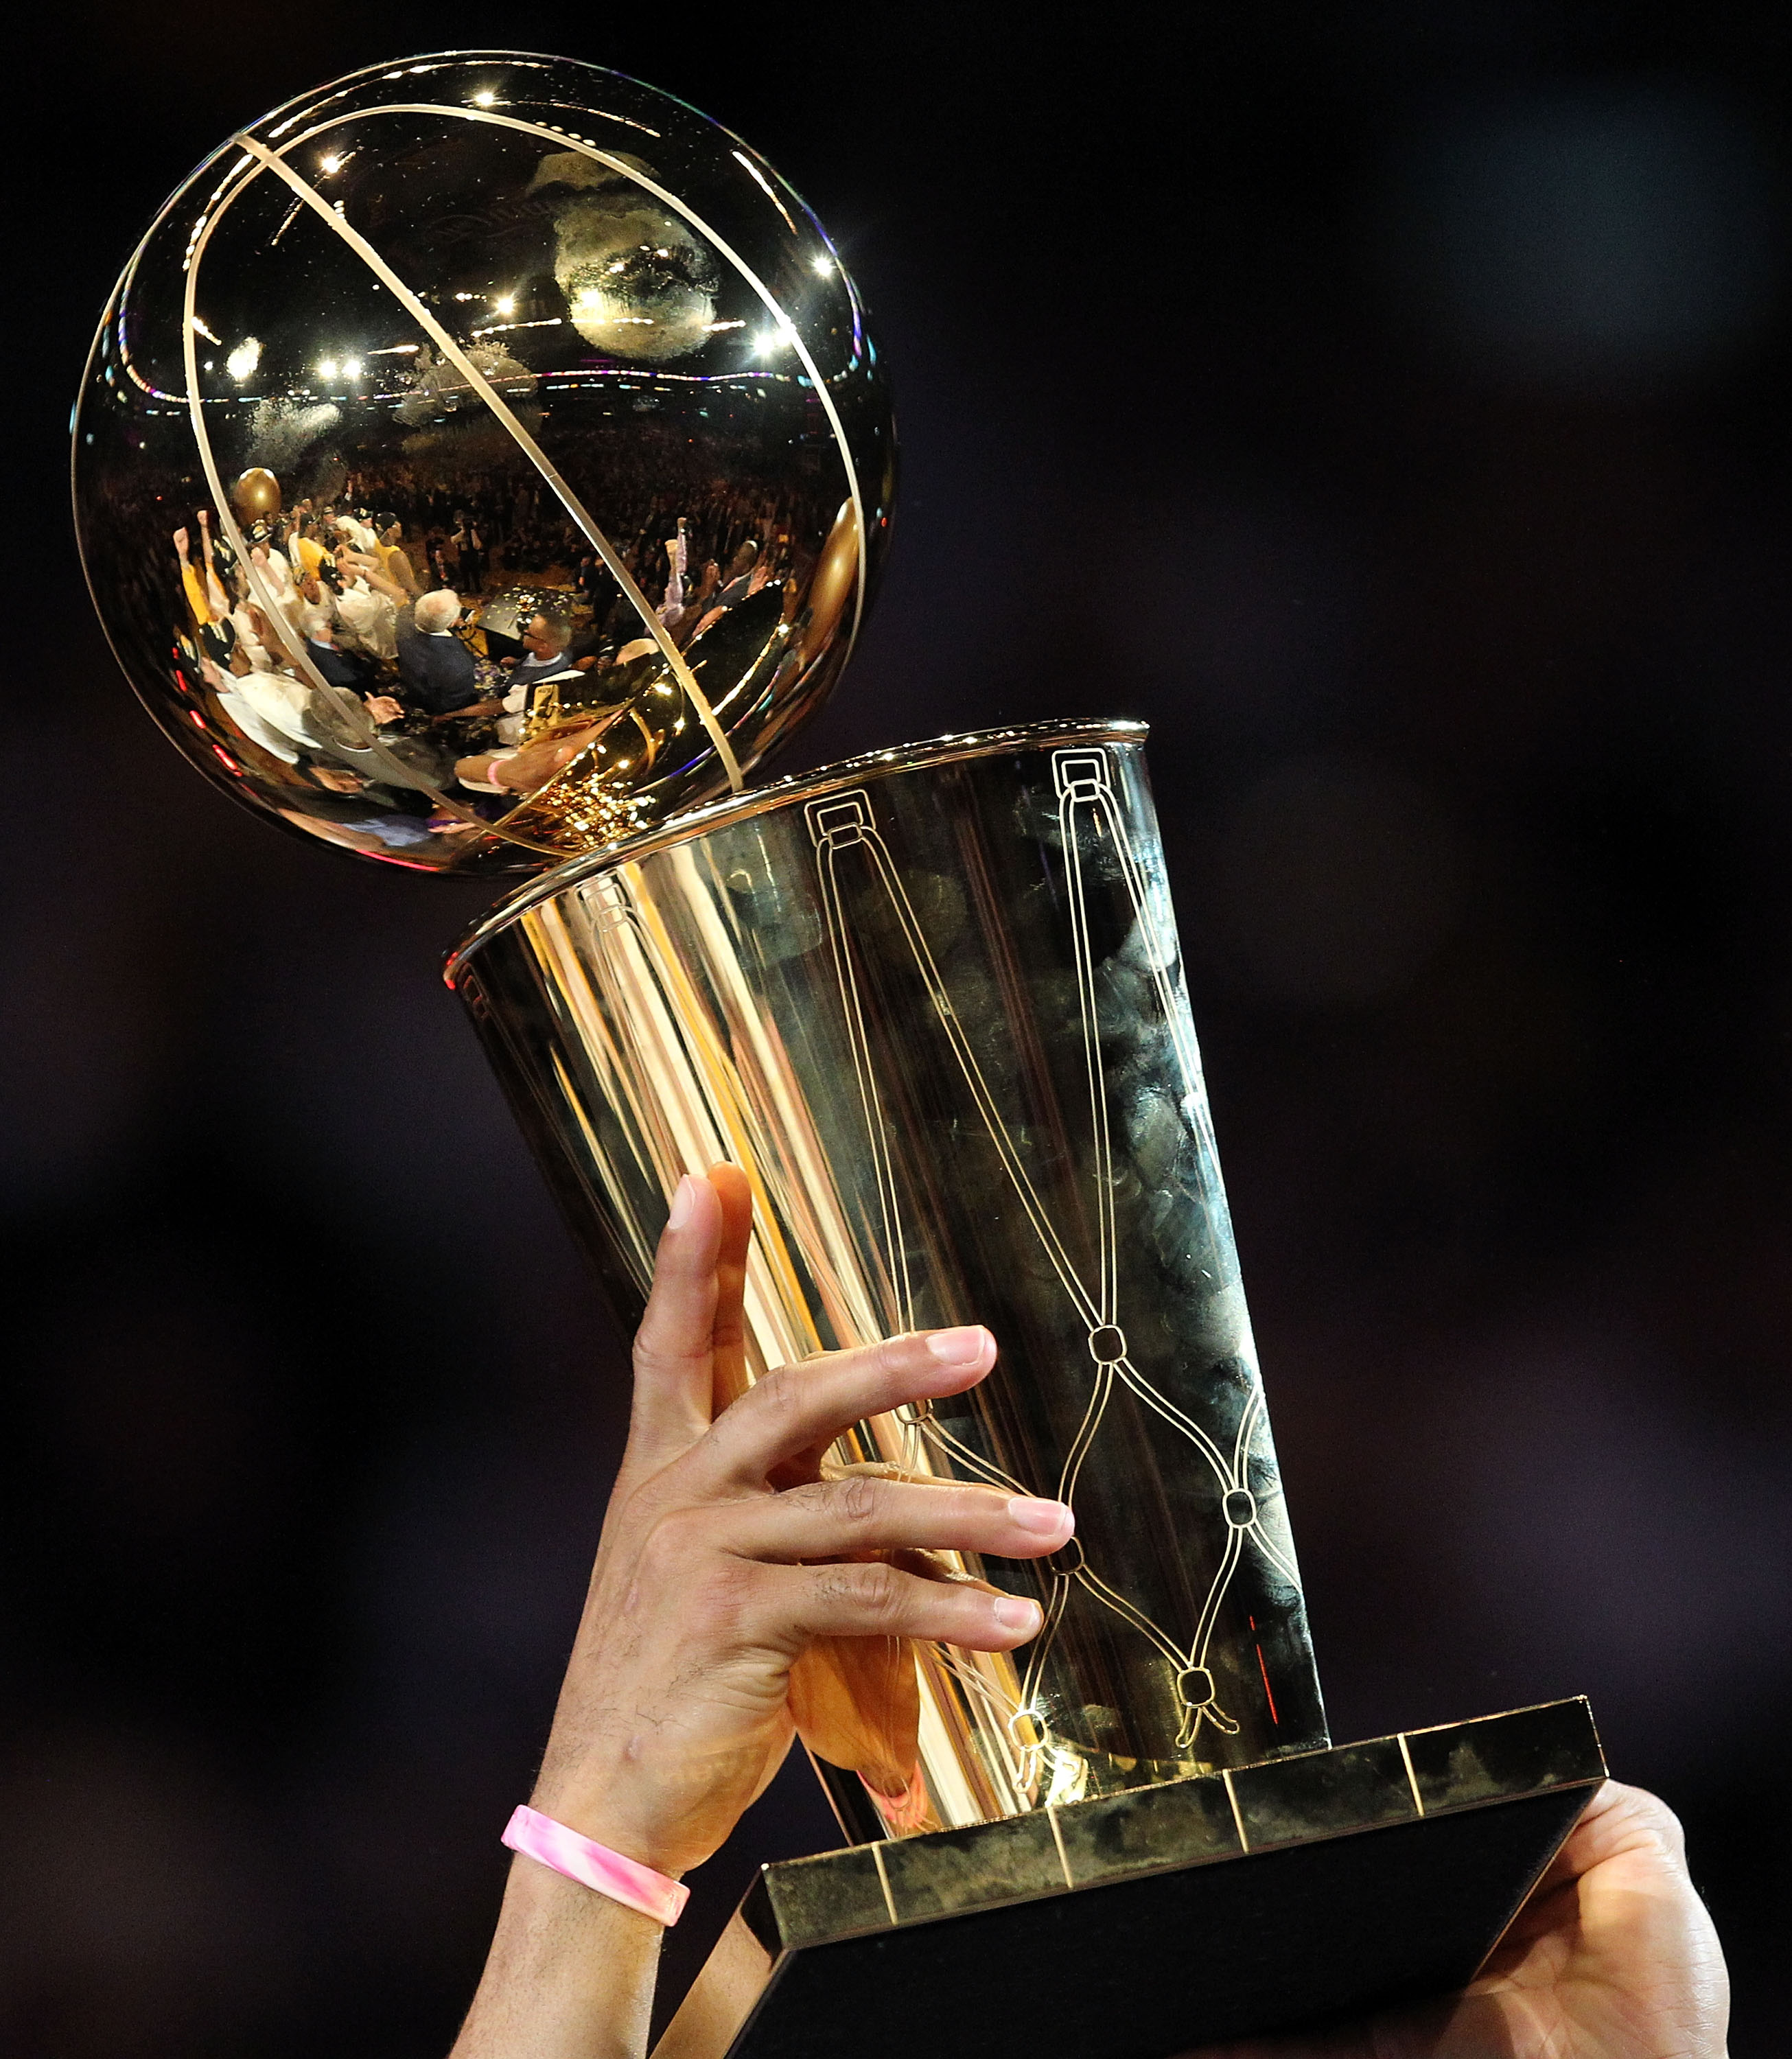 NBA season preview: Who will hoist the Larry O'Brien trophy